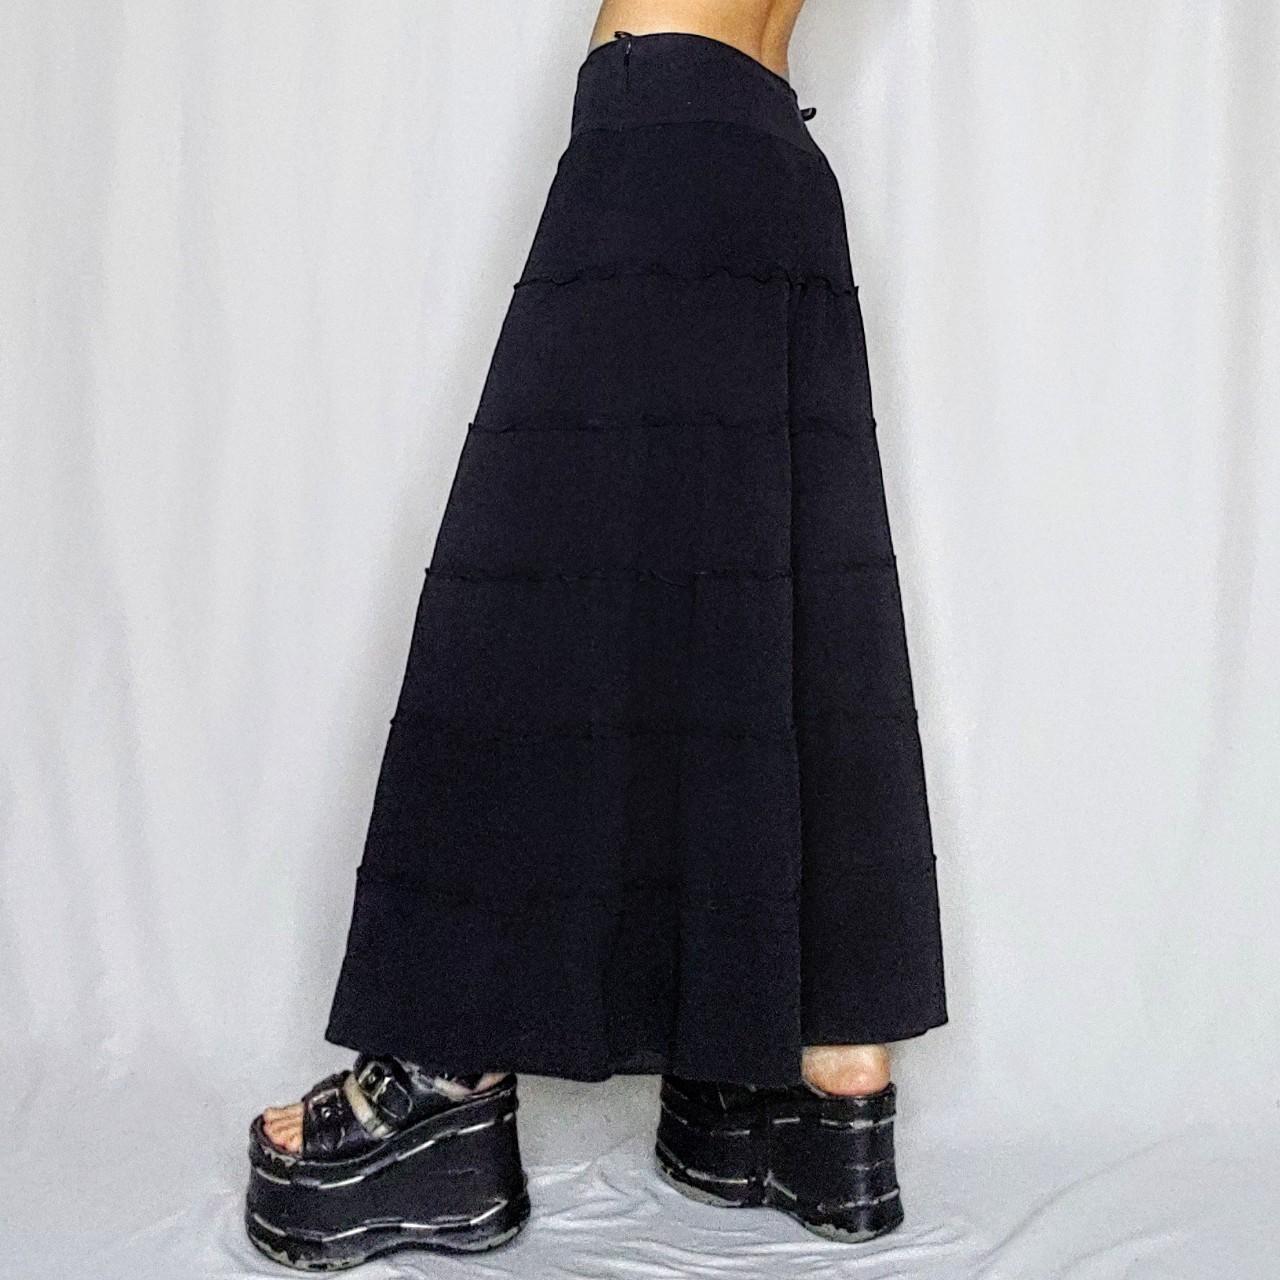 2000s tiered maxi skirt 100% cotton in black... - Depop